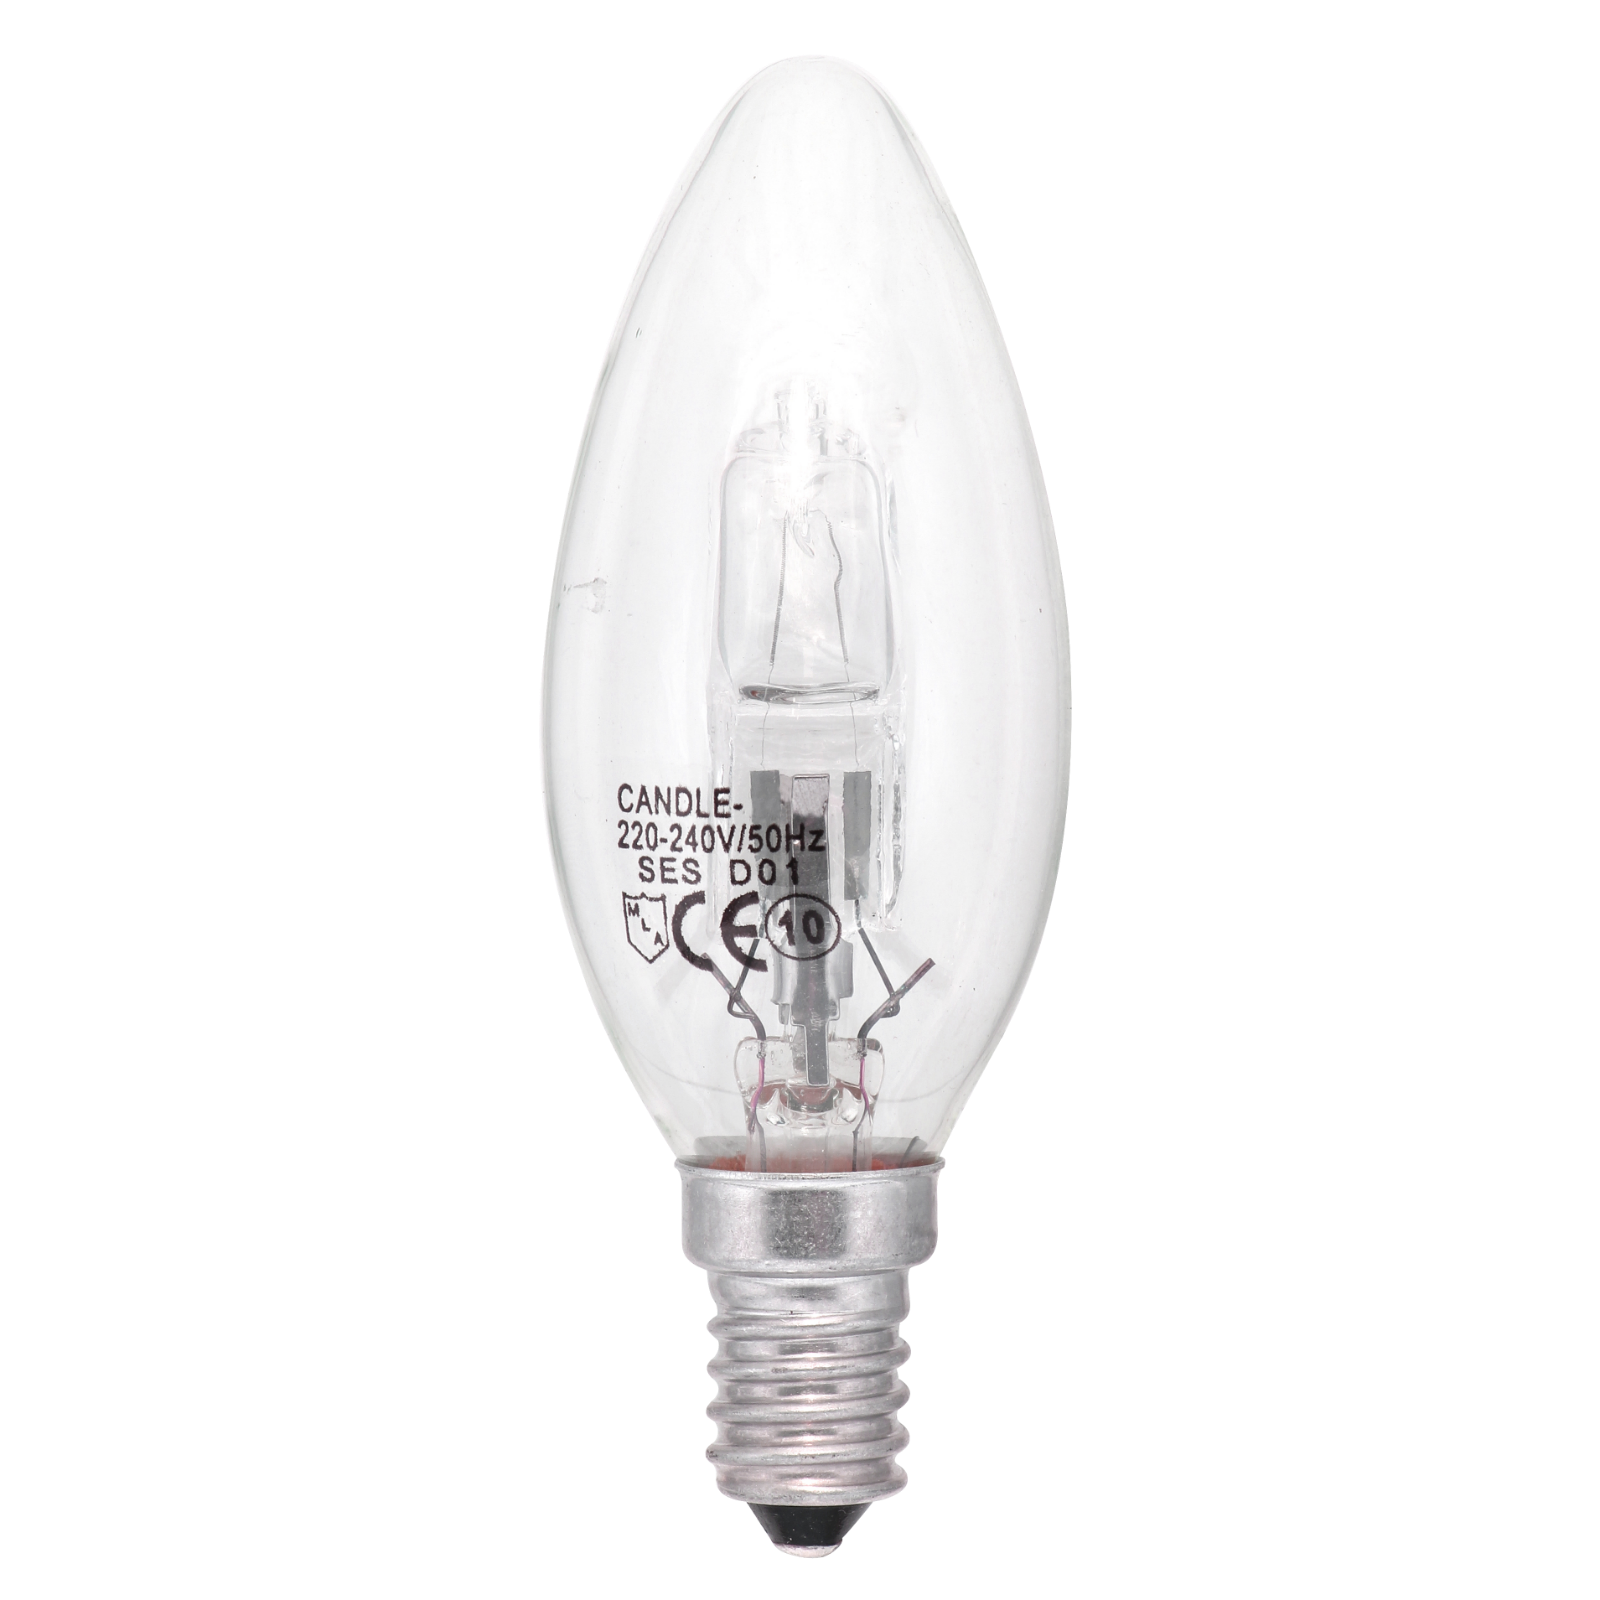 42W Halogen Energy Saving Clear Candle Lamp SES (equivalent To 60W) - HALO-C42SES 